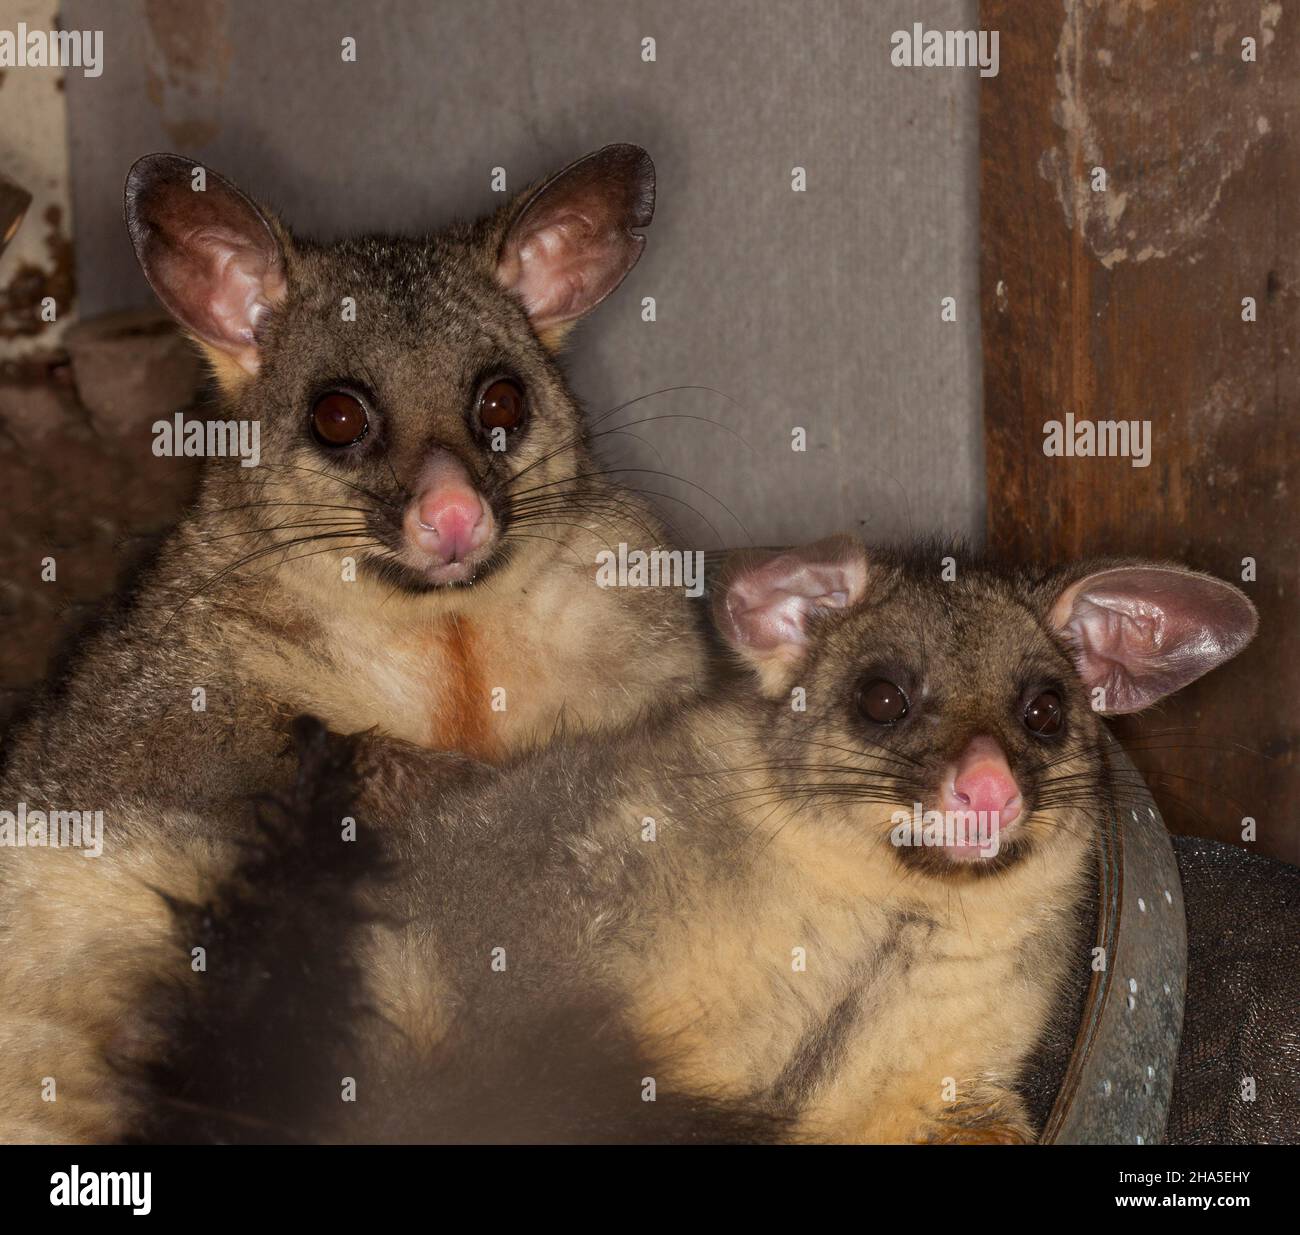 Two beautiful nocturnal Brush-tailed Possums, mother and large baby, alert and staring at camera, in a shed in an urban backyard in Australia Stock Photo